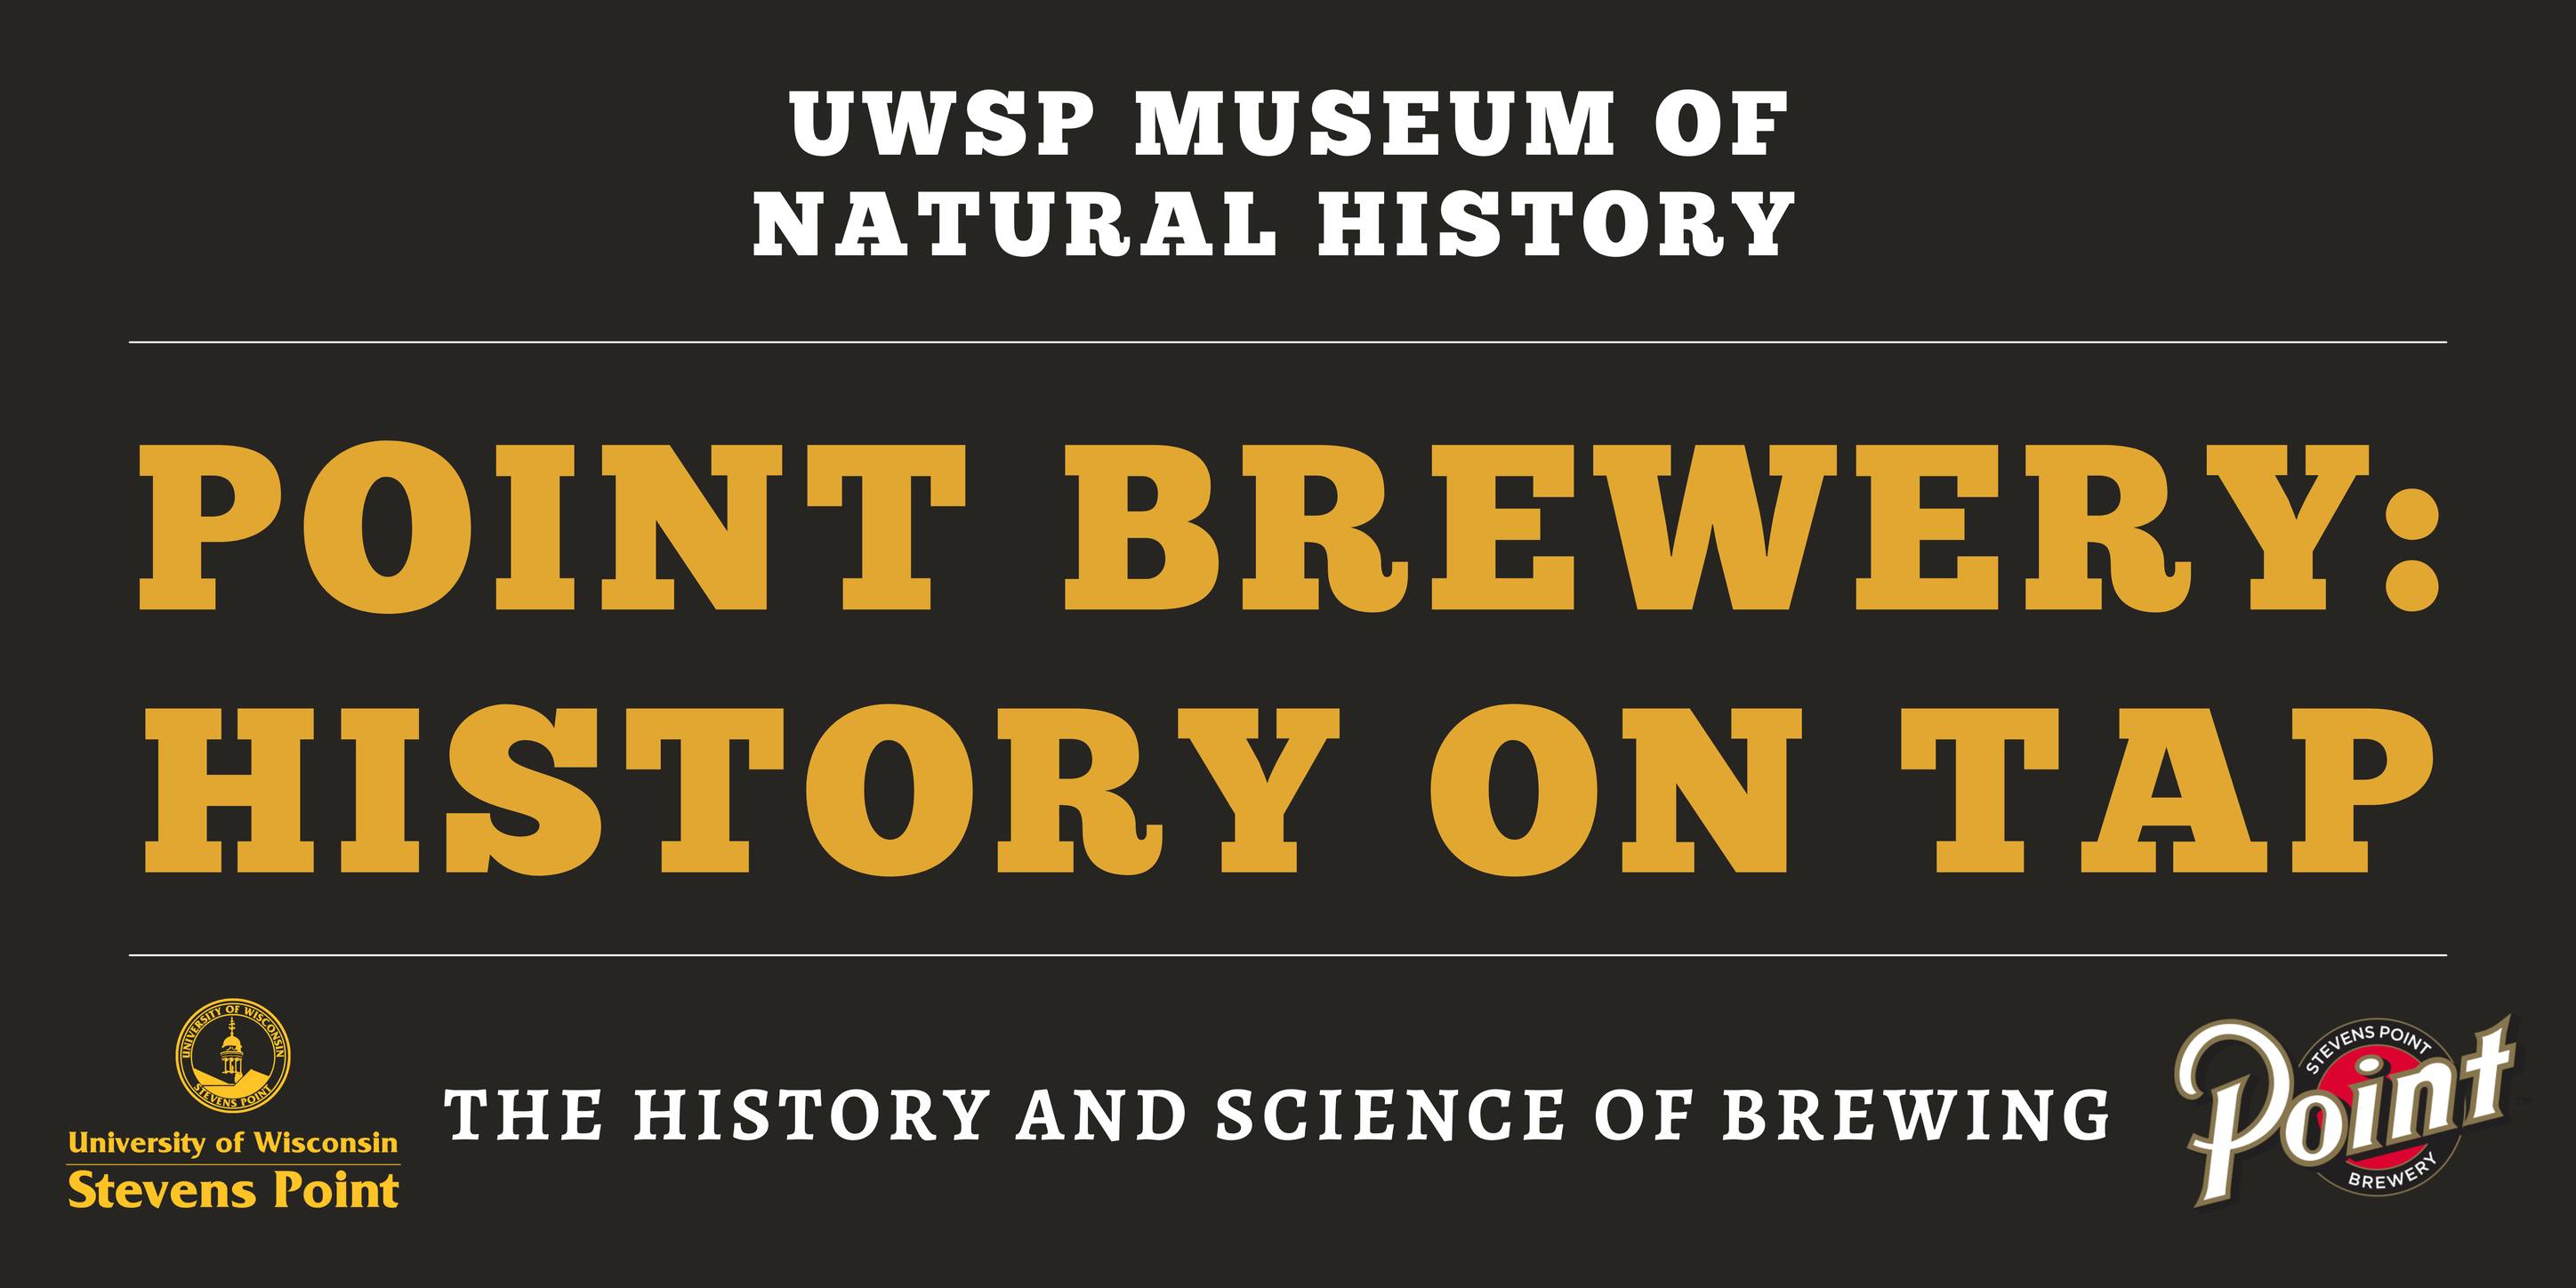 point-brewery-history-on-tap.jpg